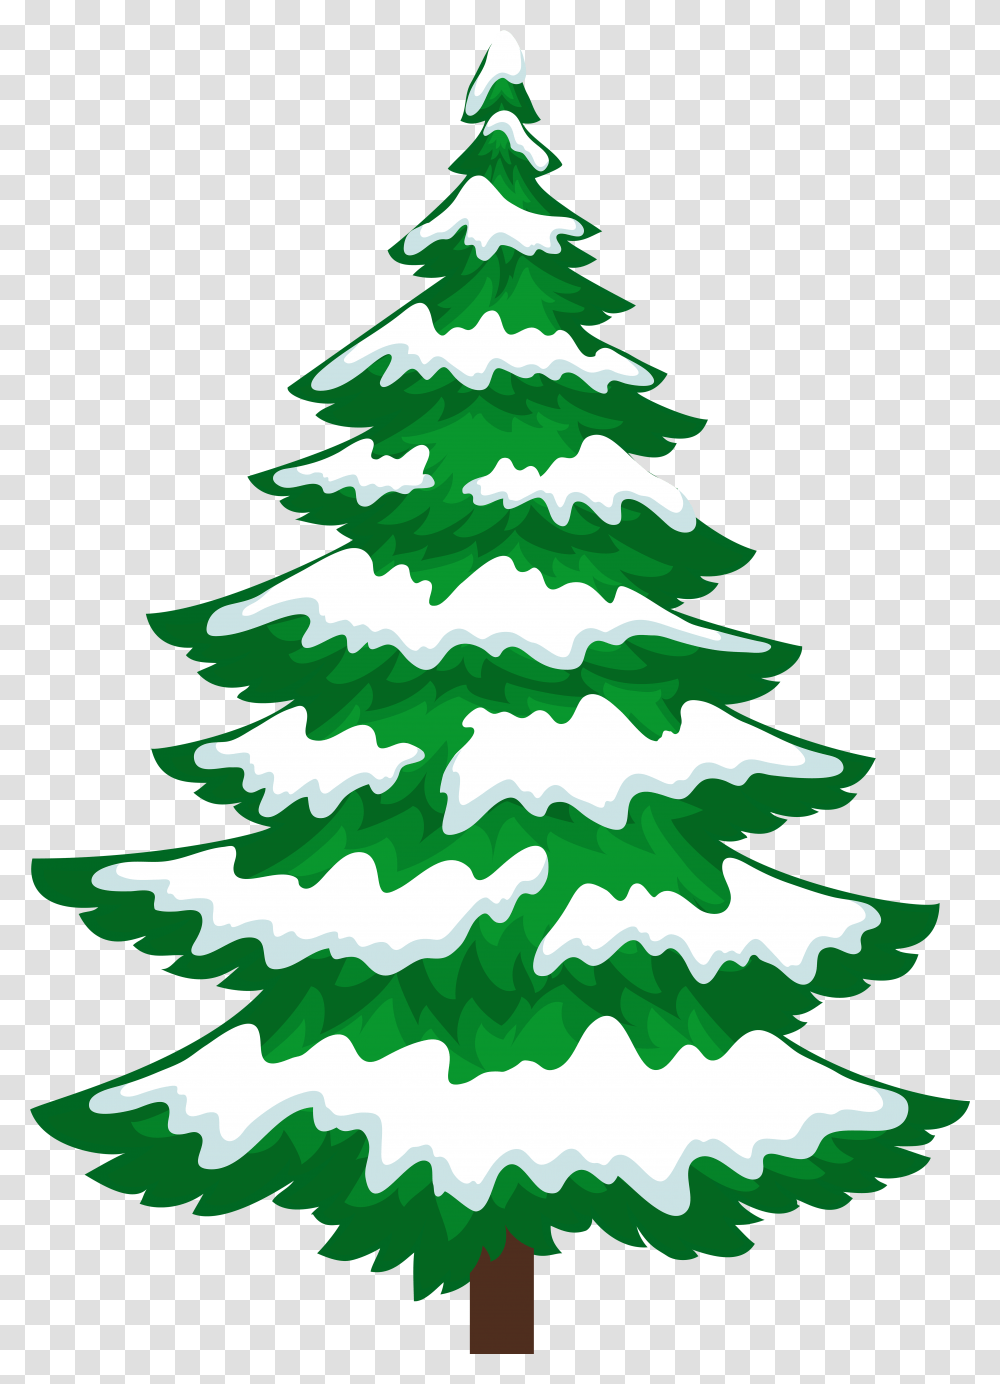 Christmas Tree Snow Clipart Snowy Christmas Tree Clipart, Plant, Ornament Transparent Png